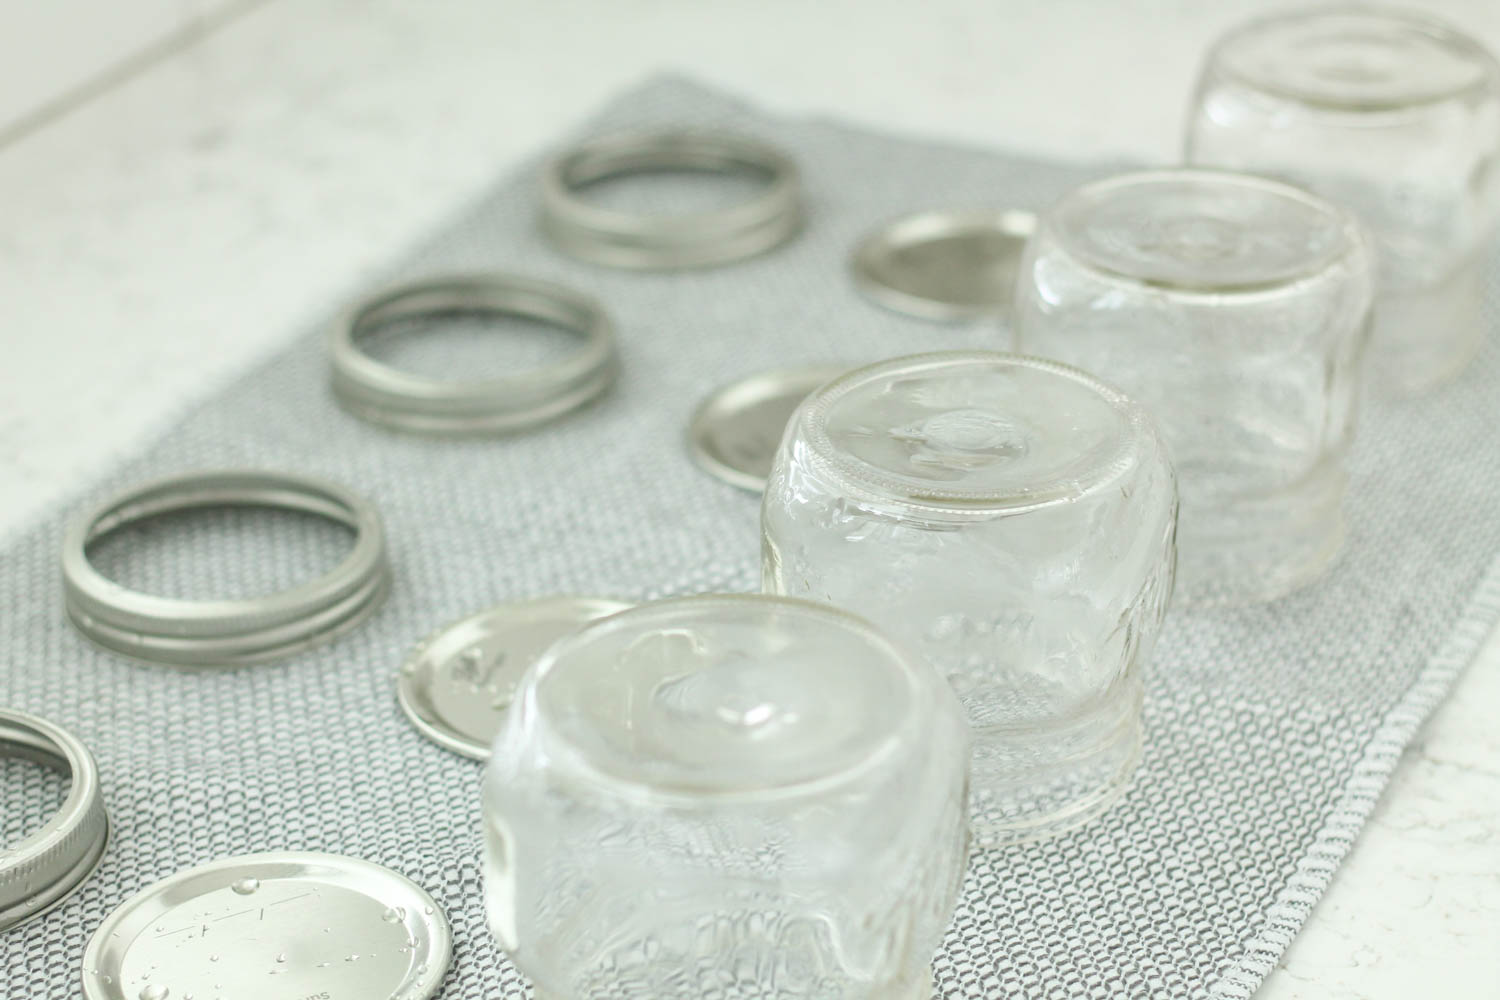 8 ounce canning jars